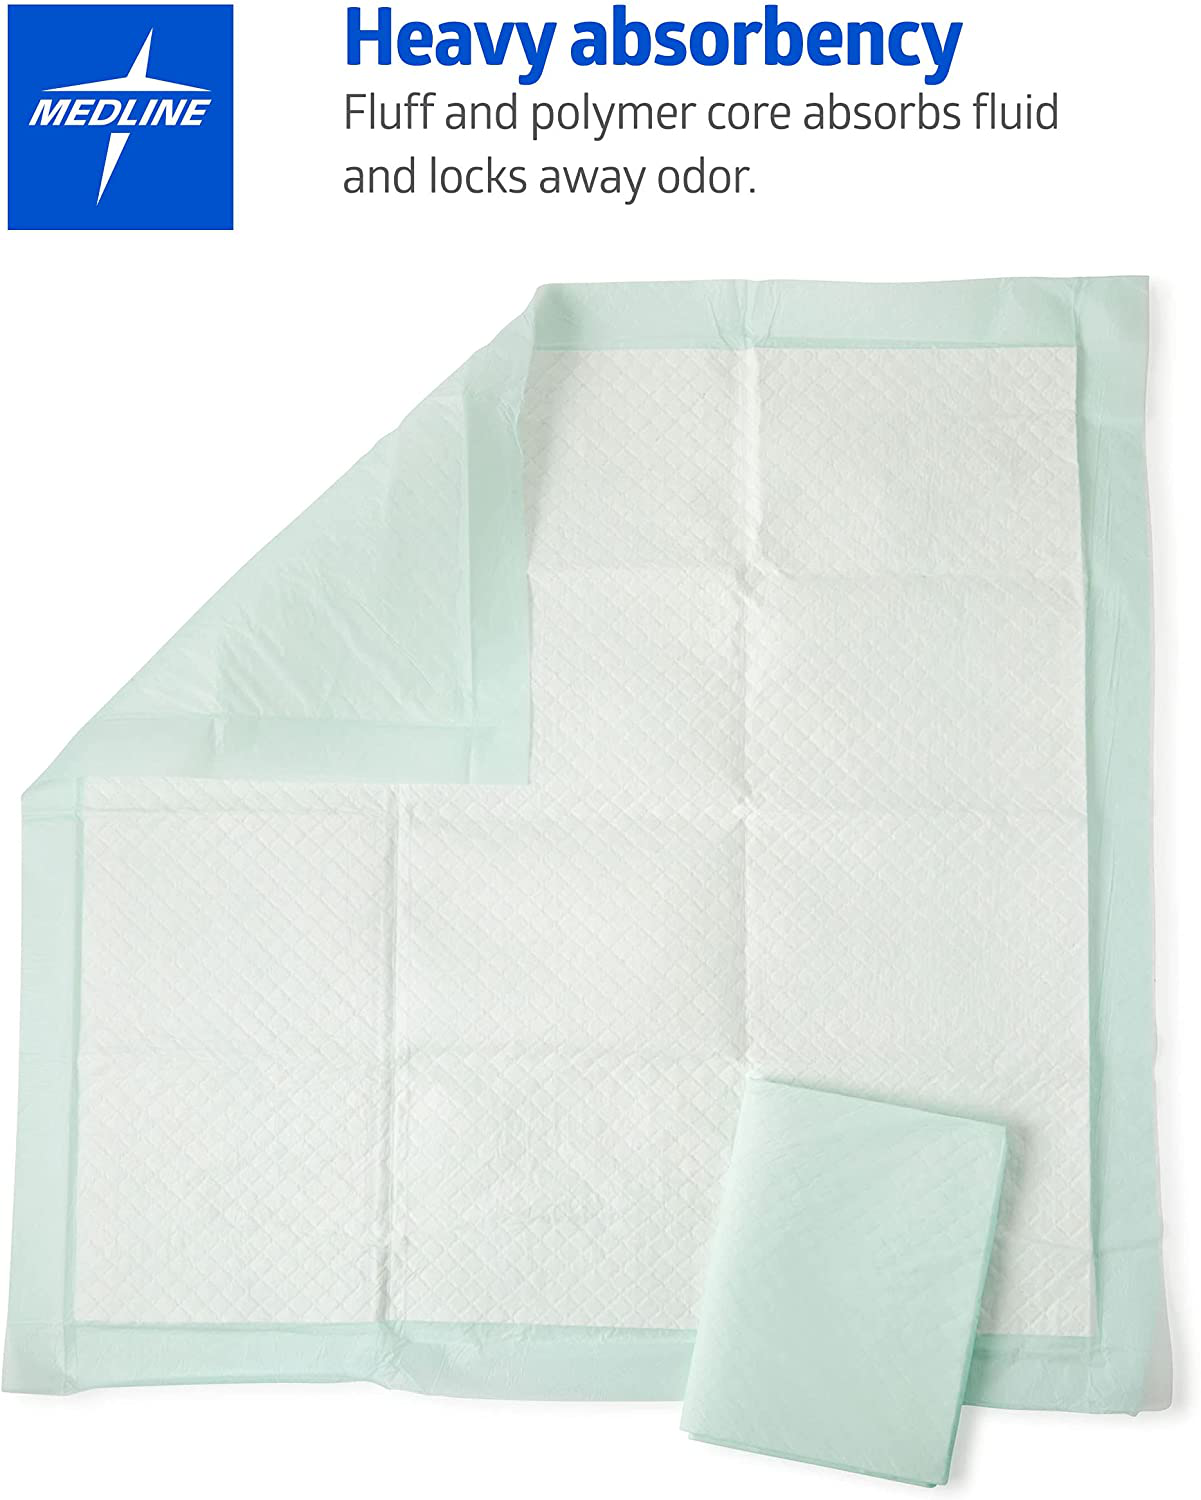 Medline Heavy Absorbency 36" X 36" Quilted Bed Pads, Large Disposable Underpads, 50 per Case, Fluff and Polymer Core, Great Protection for Beds, Furniture, Surfaces